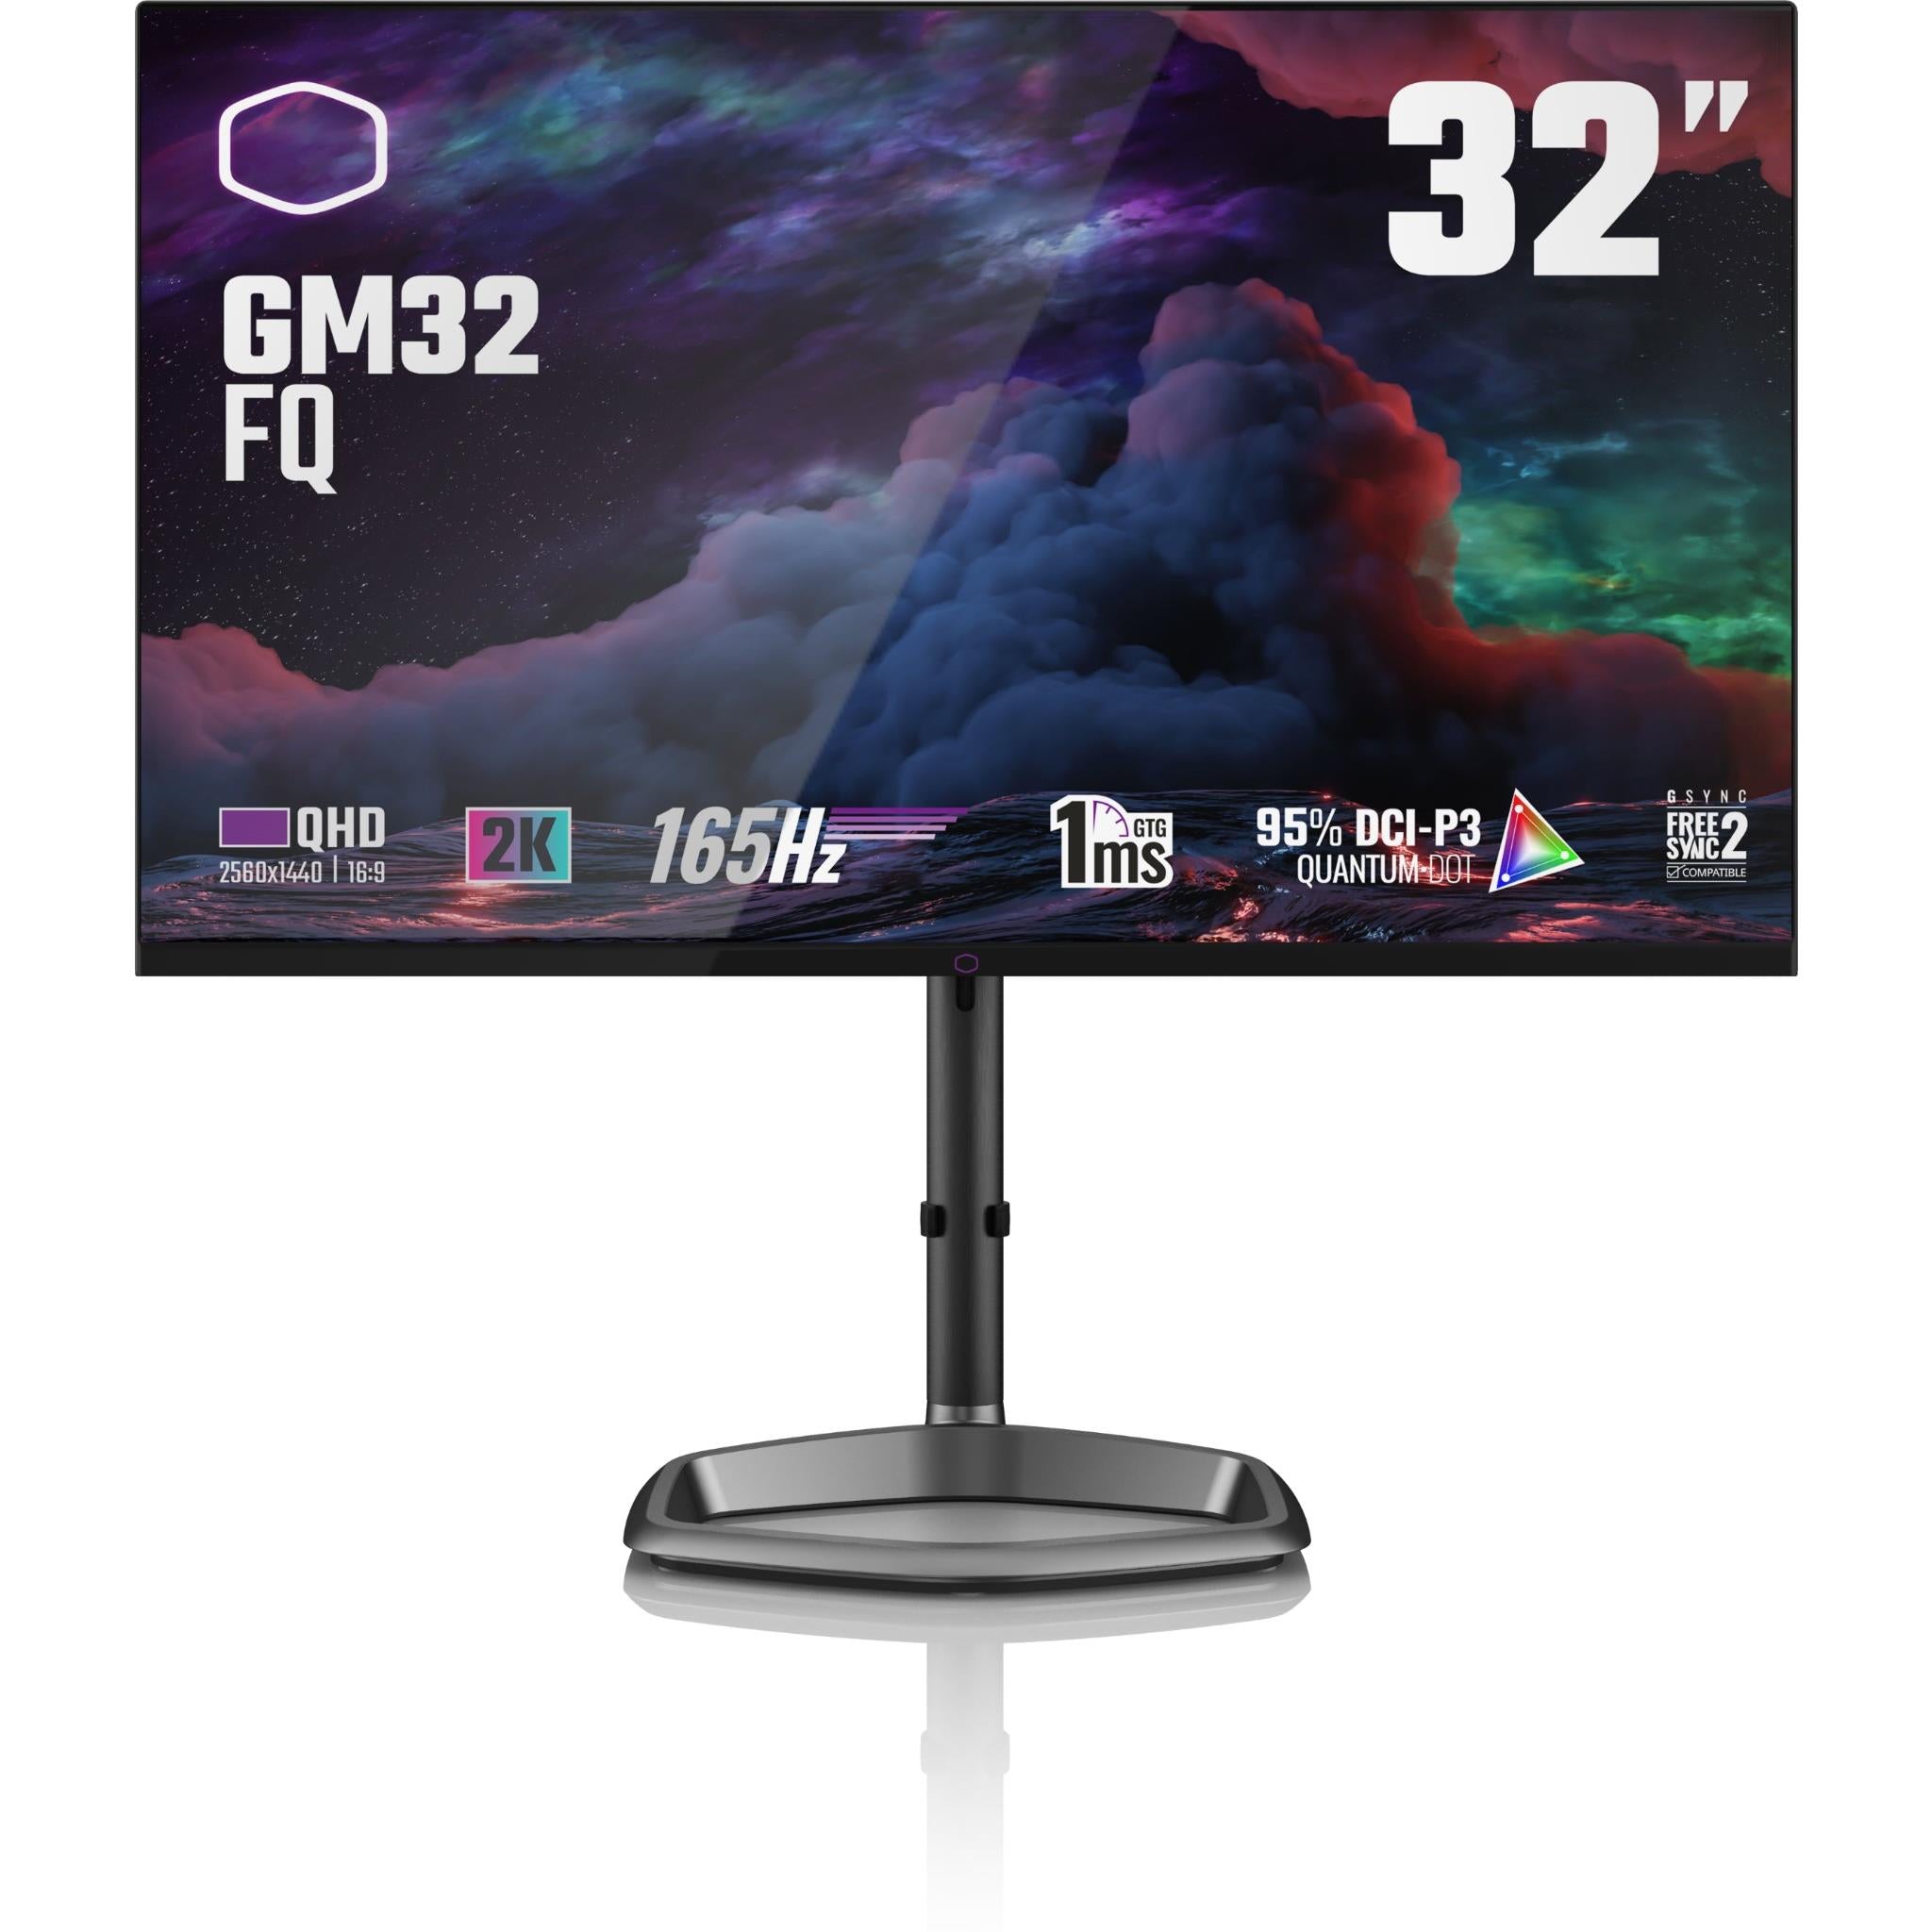 cooler master gm32fq 32" qhd 165hz gaming monitor